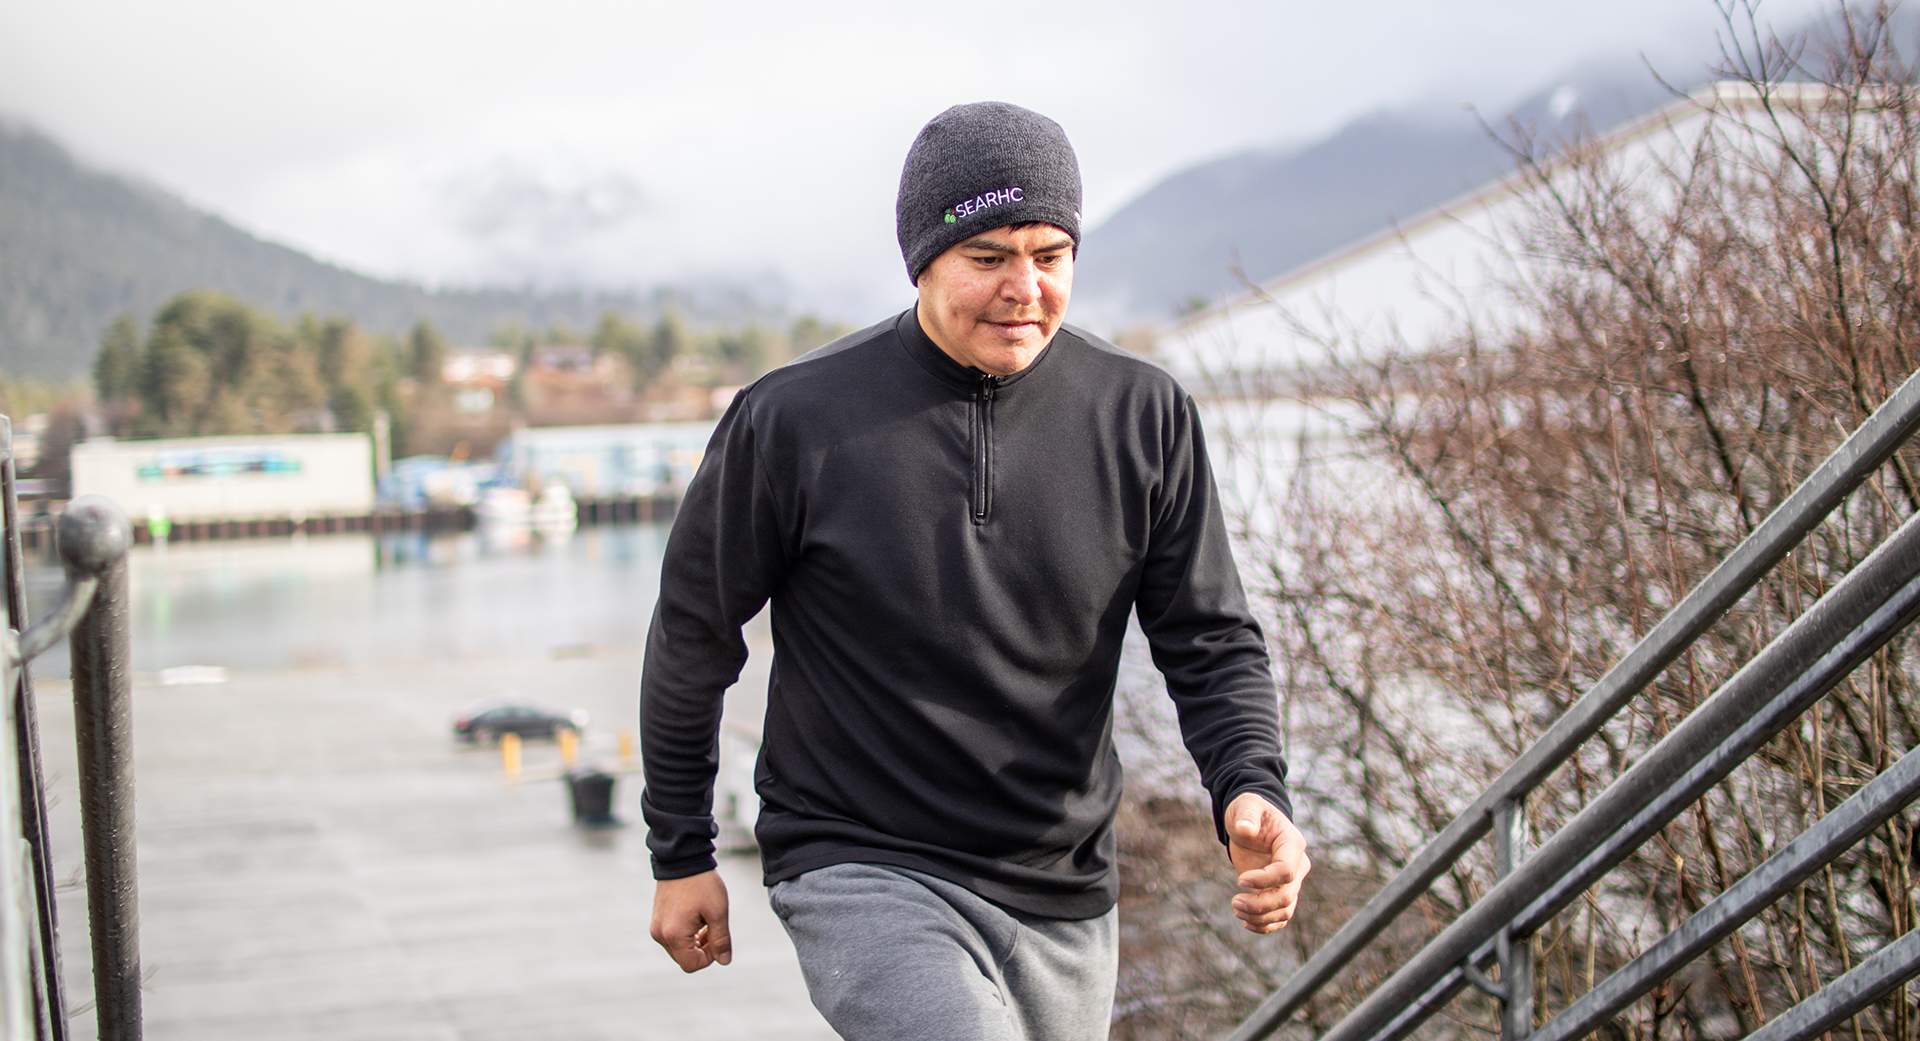 A man wearing a beanie walks briskly up the stairs for exercise